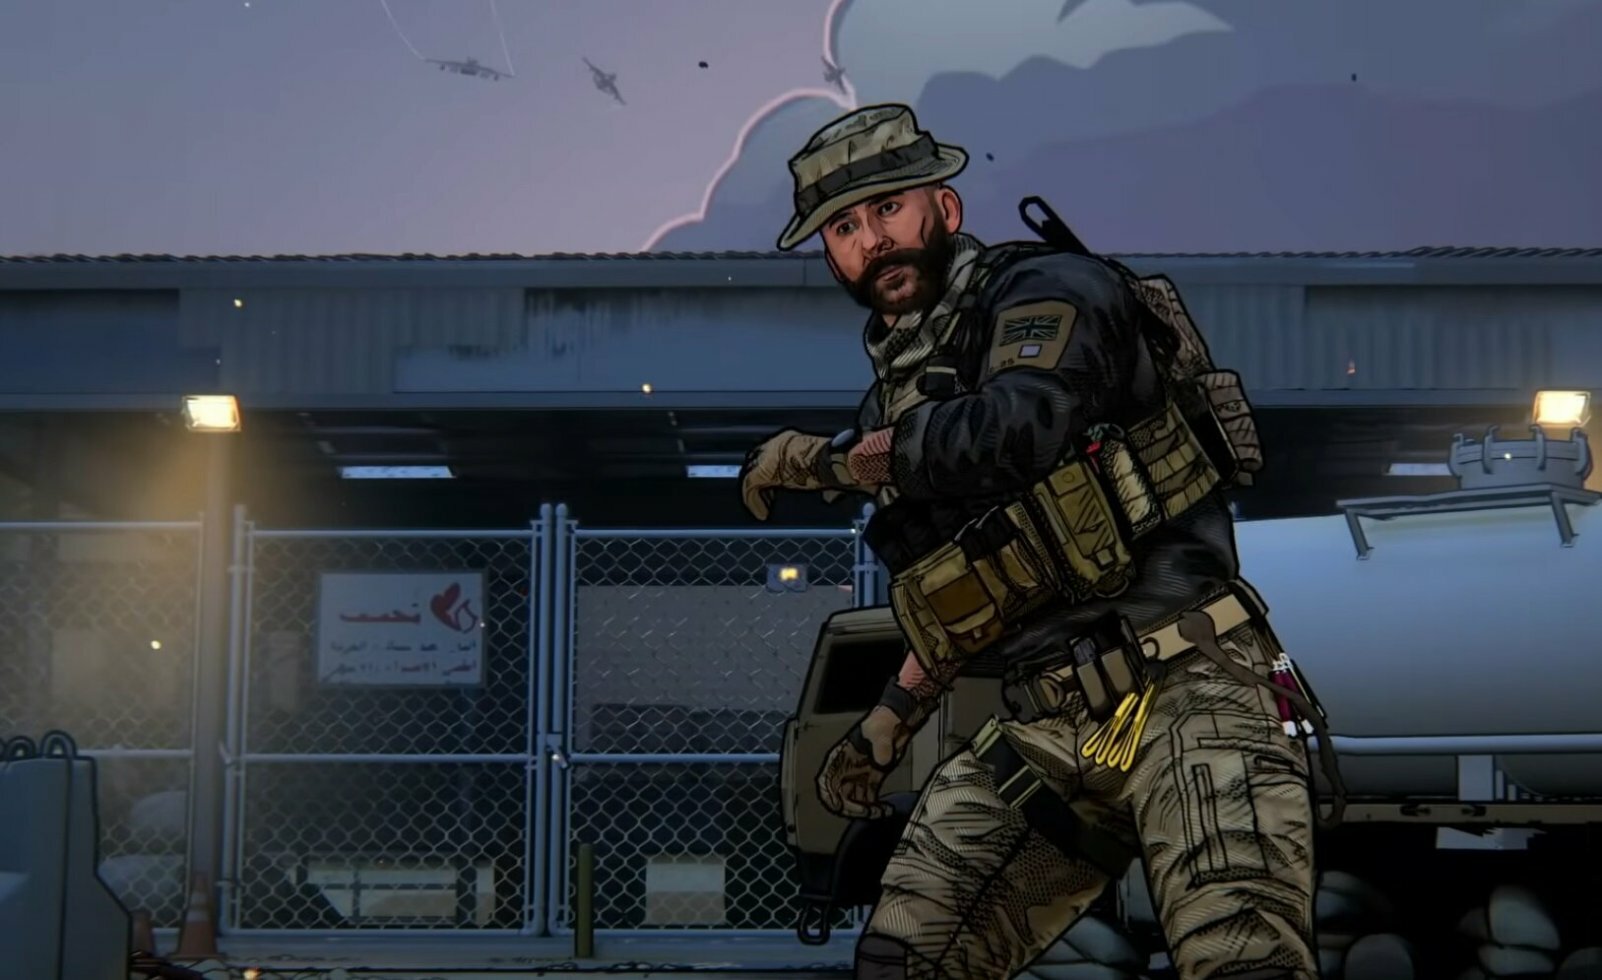 Call of Duty introducerer cel-shaded indhold i season 5: Borderlands much?